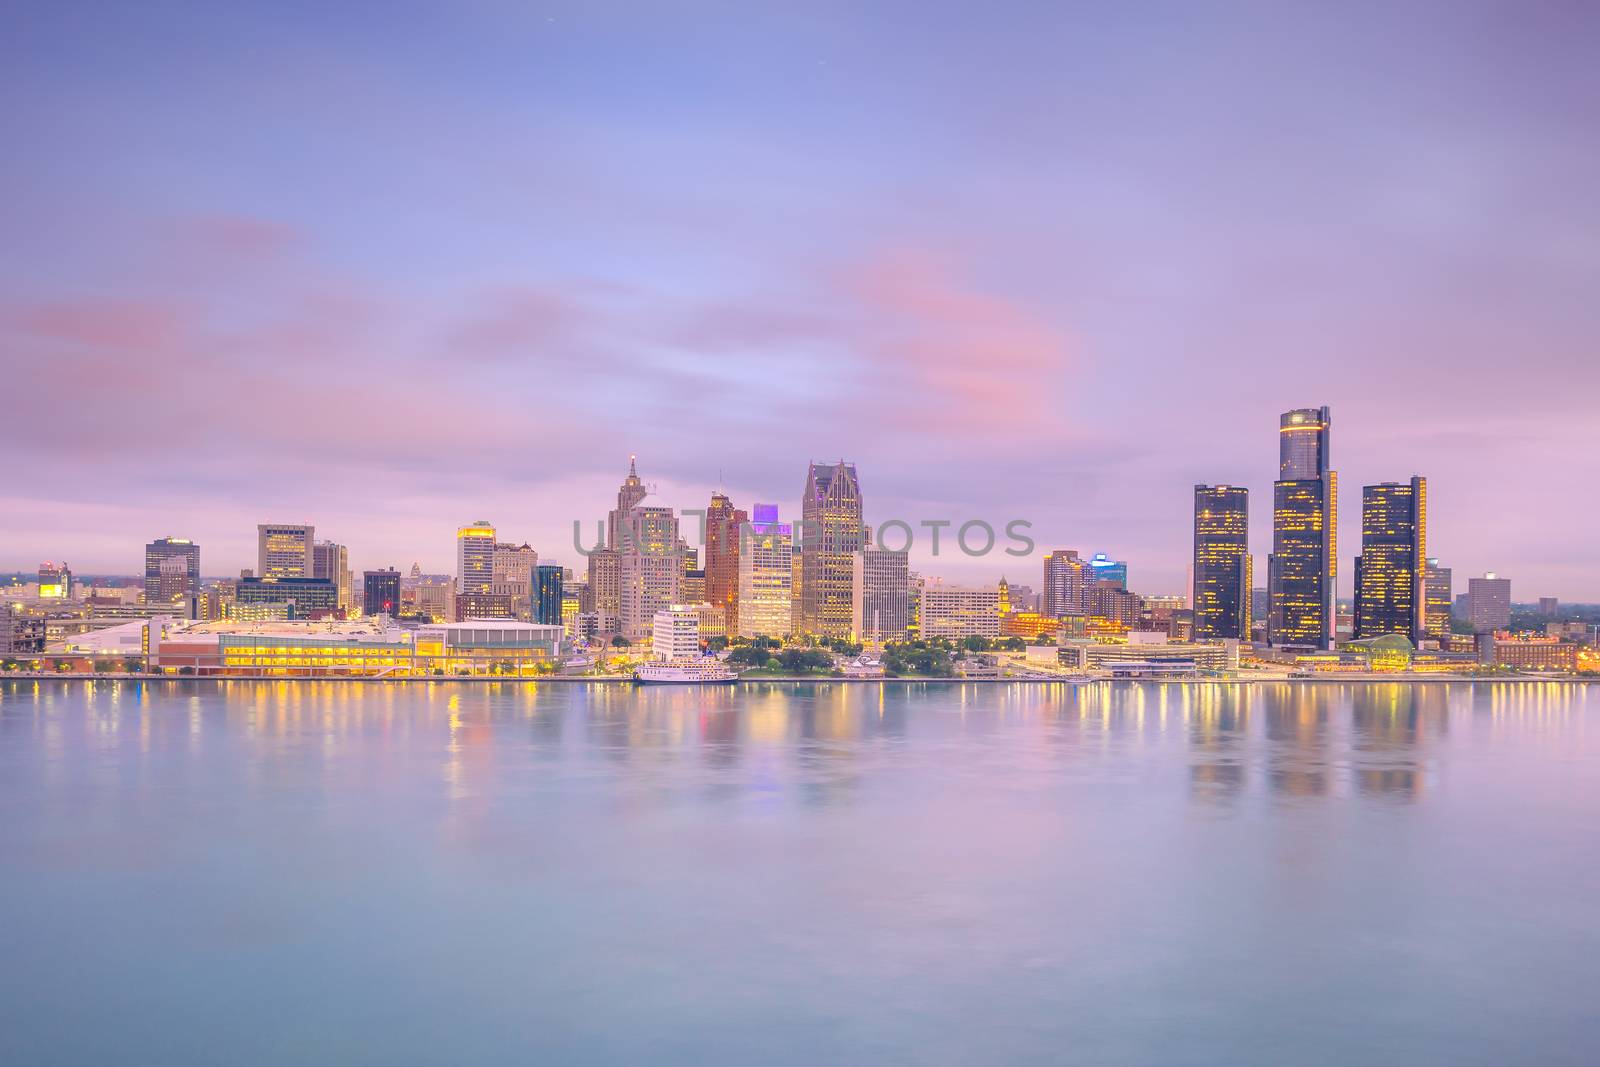 Detroit skyline in Michigan, USA at sunset by f11photo